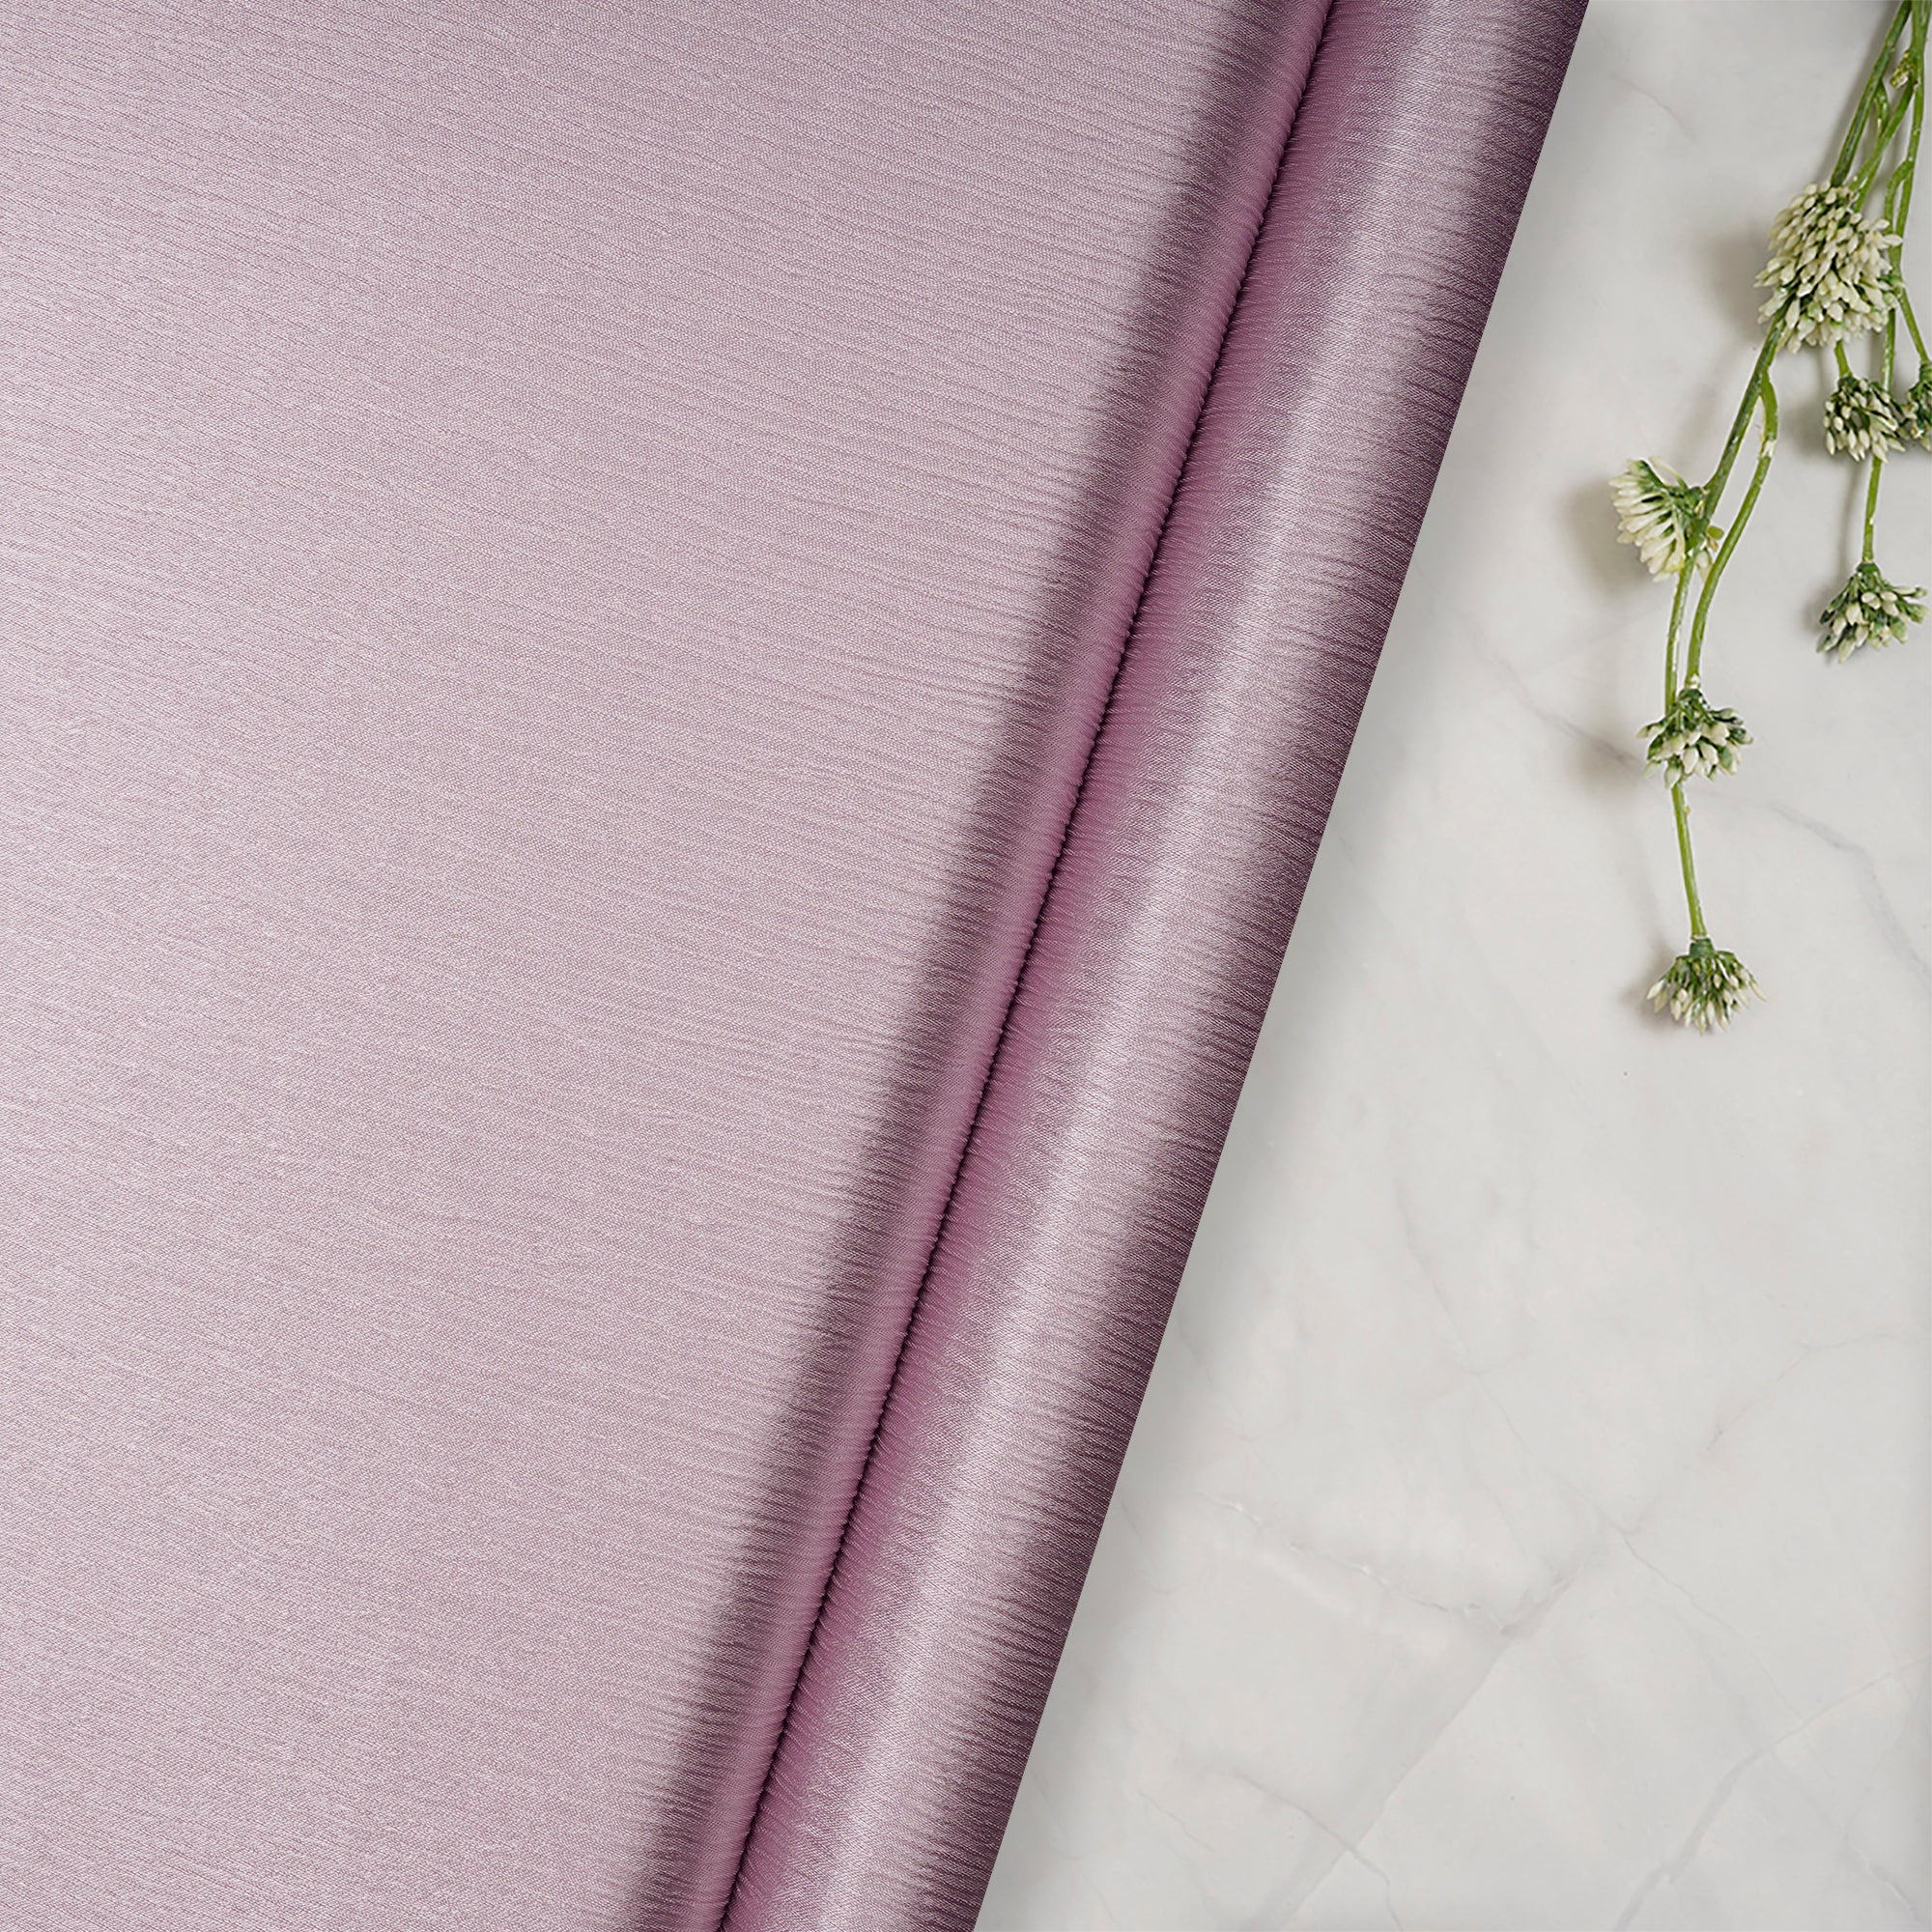 Lavender Imported Crinkled Satin Fabric (60" Wide)